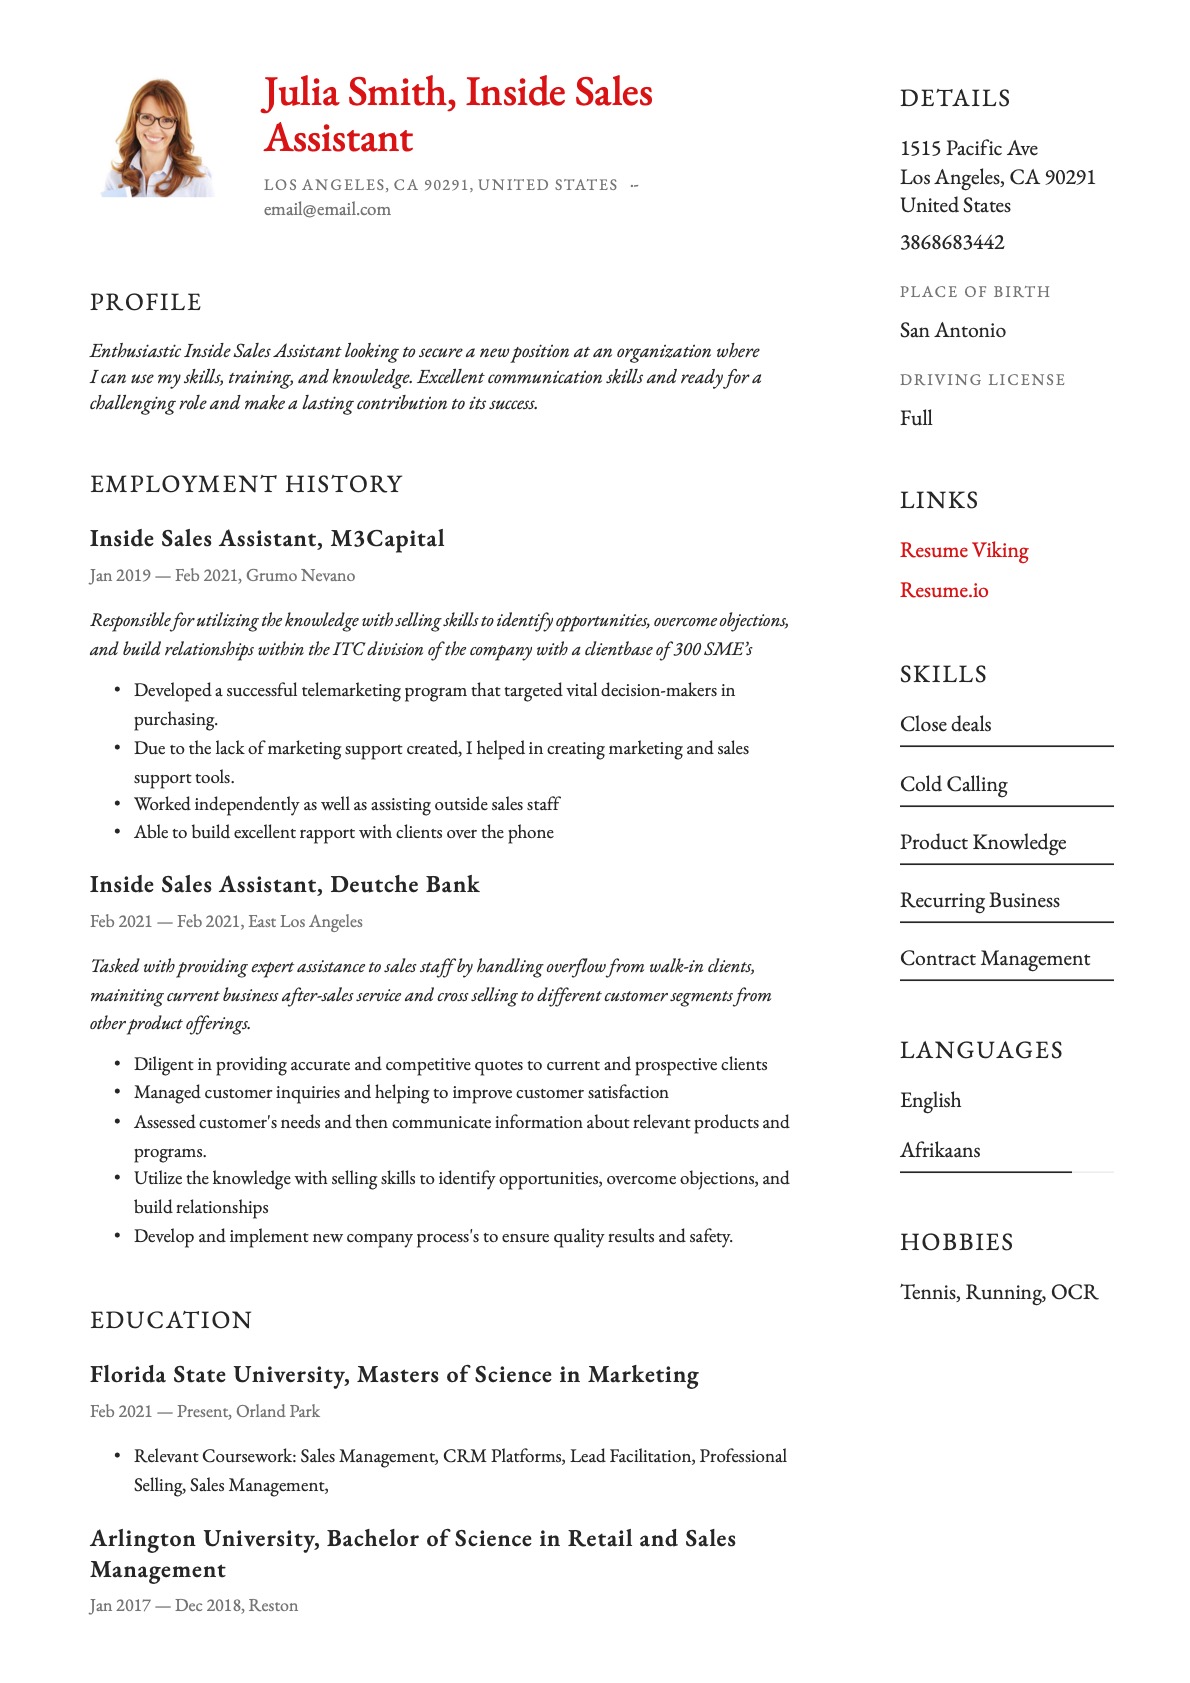 Example Resume Inside Sales Assistant-13